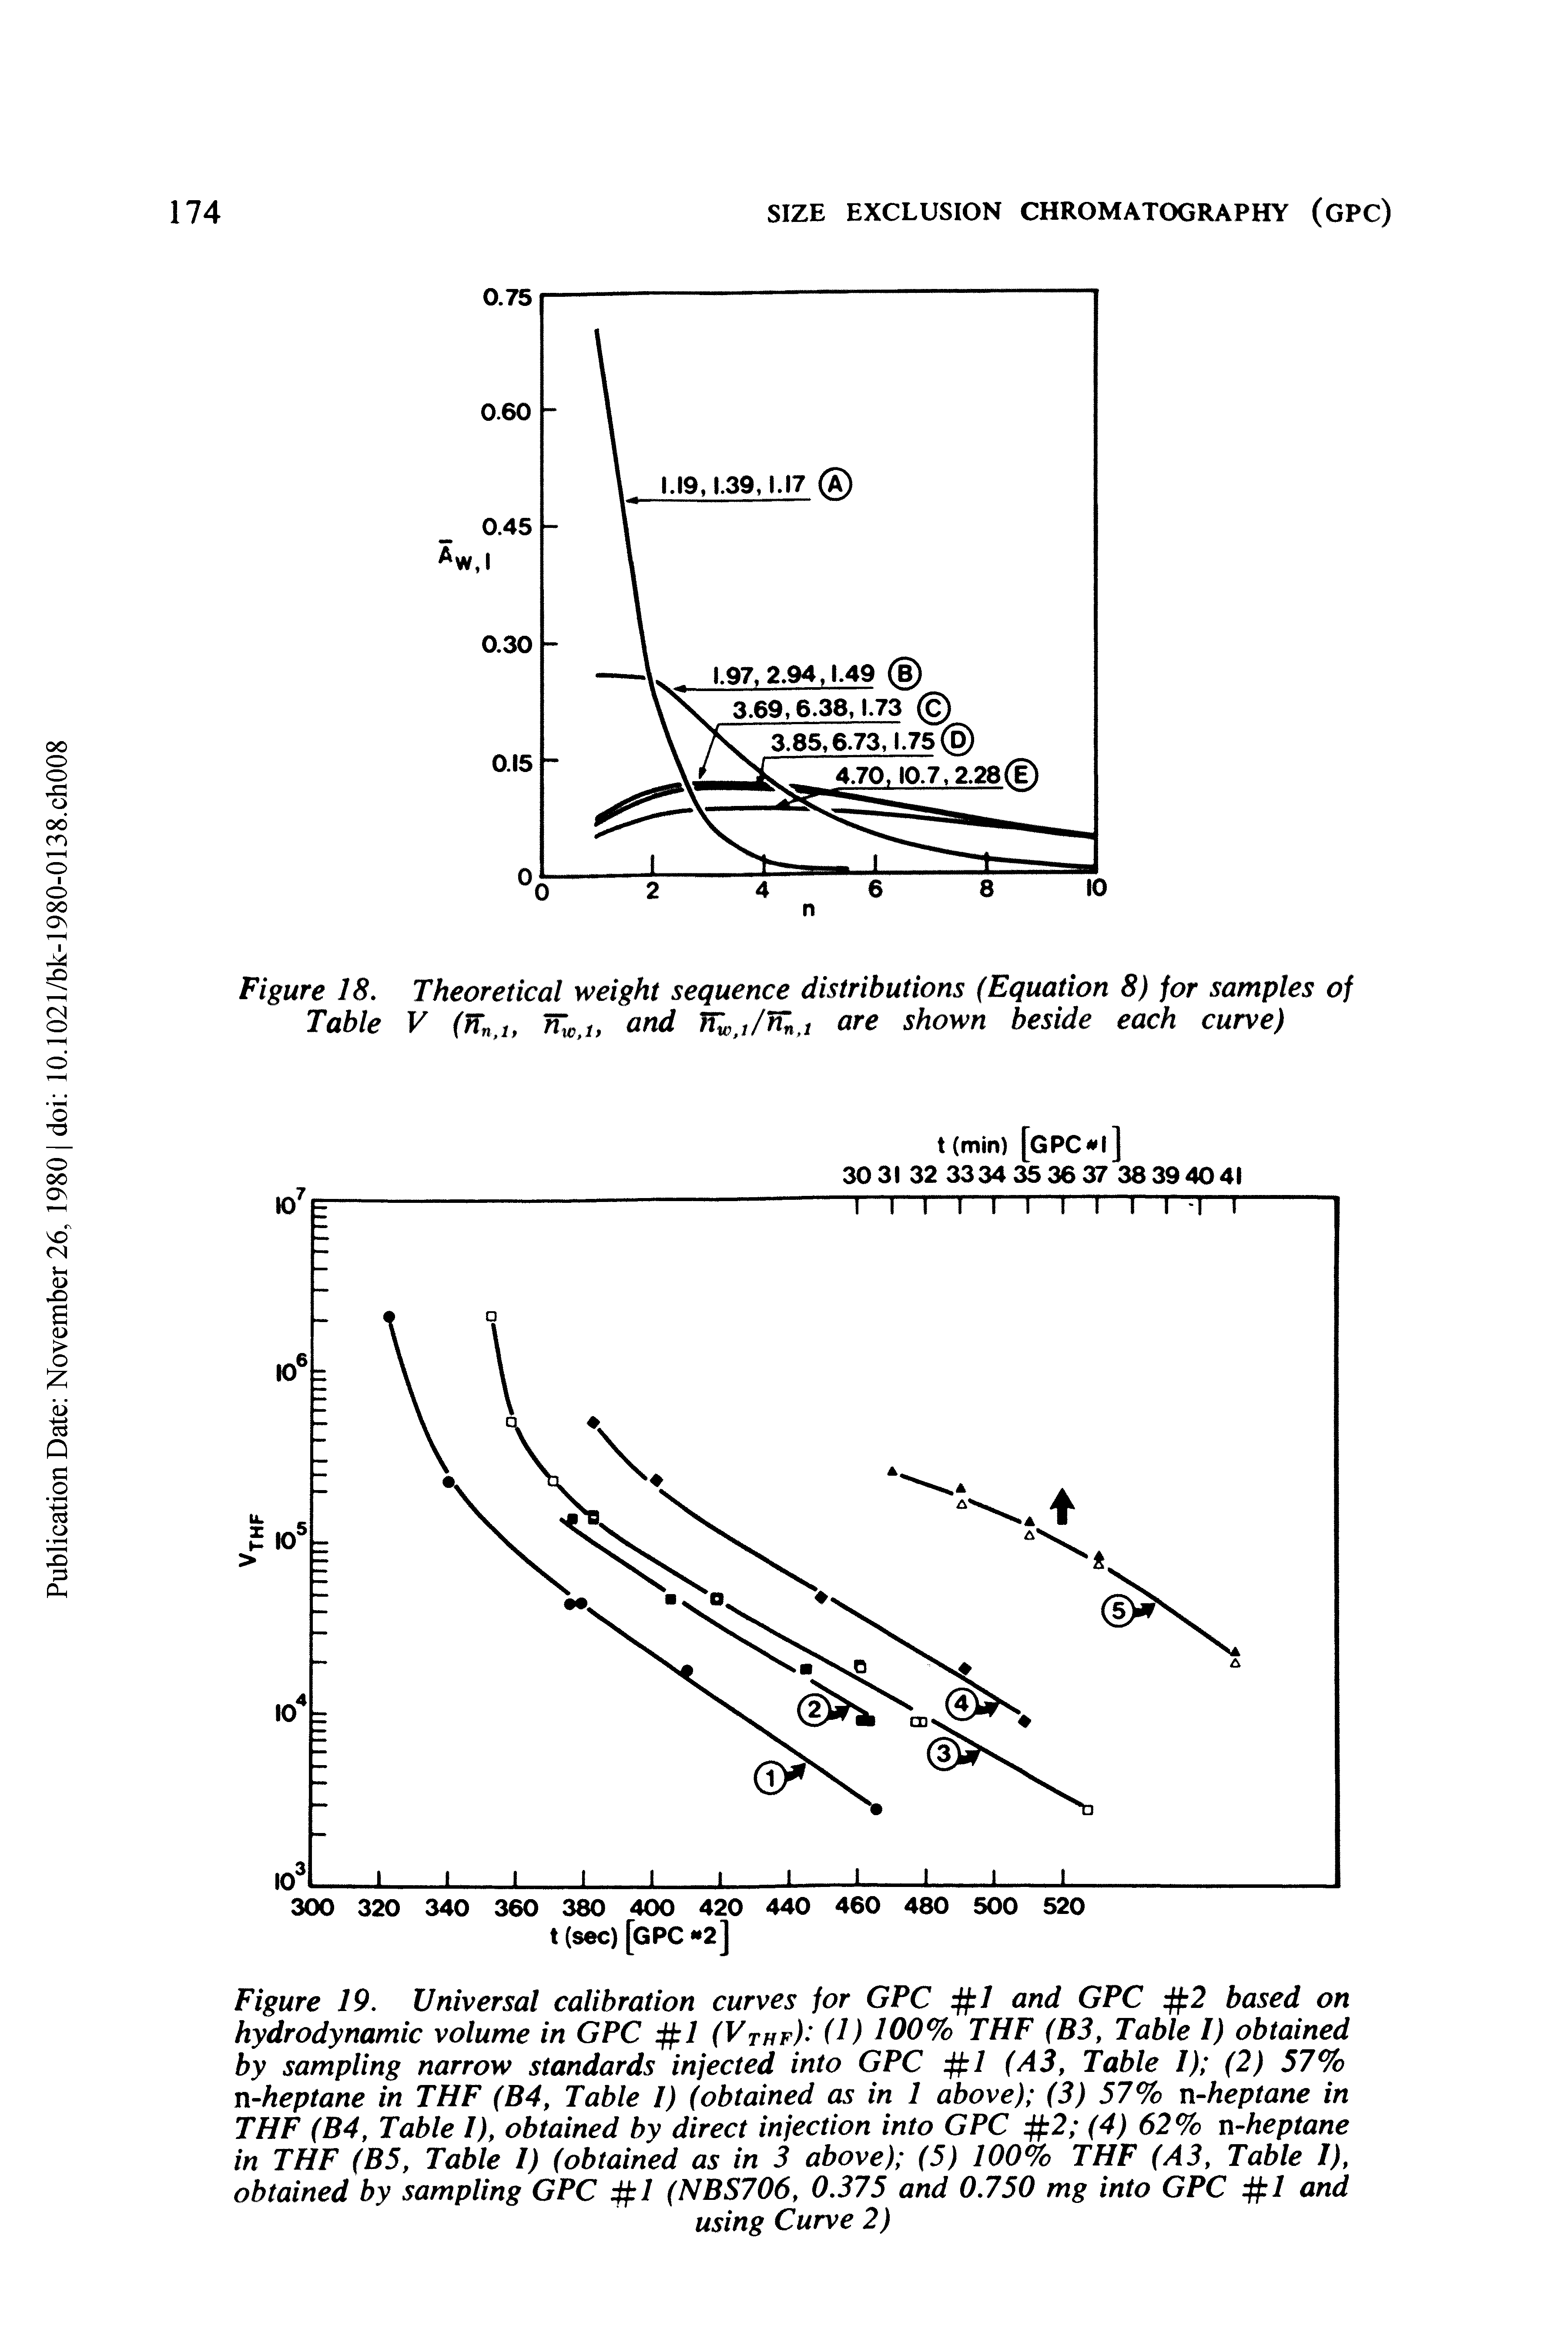 Figure 19. Universal calibration curves for GPC 1 and GPC 2 based on hydrodynamic volume in GPC 1 (Vthf) (J) 100% THF (B3, Table I) obtained by sampling narrow standards infected into GPC 1 (A3, Table I) (2) 57% n-heptane in THF (B4, Table 1) (obtained as in 1 above) (3) 57% n-heptane in THF (B4, Table 1), obtained by direct injection into GPC 2 (4) 62% n-heptane in THF (B5, Table 1) (obtained as in 3 above) (5) 100% THF (A3, Table I), obtained by sampling GPC 1 (NBS706, 0.375 and 0.750 mg into GPC 1 and...